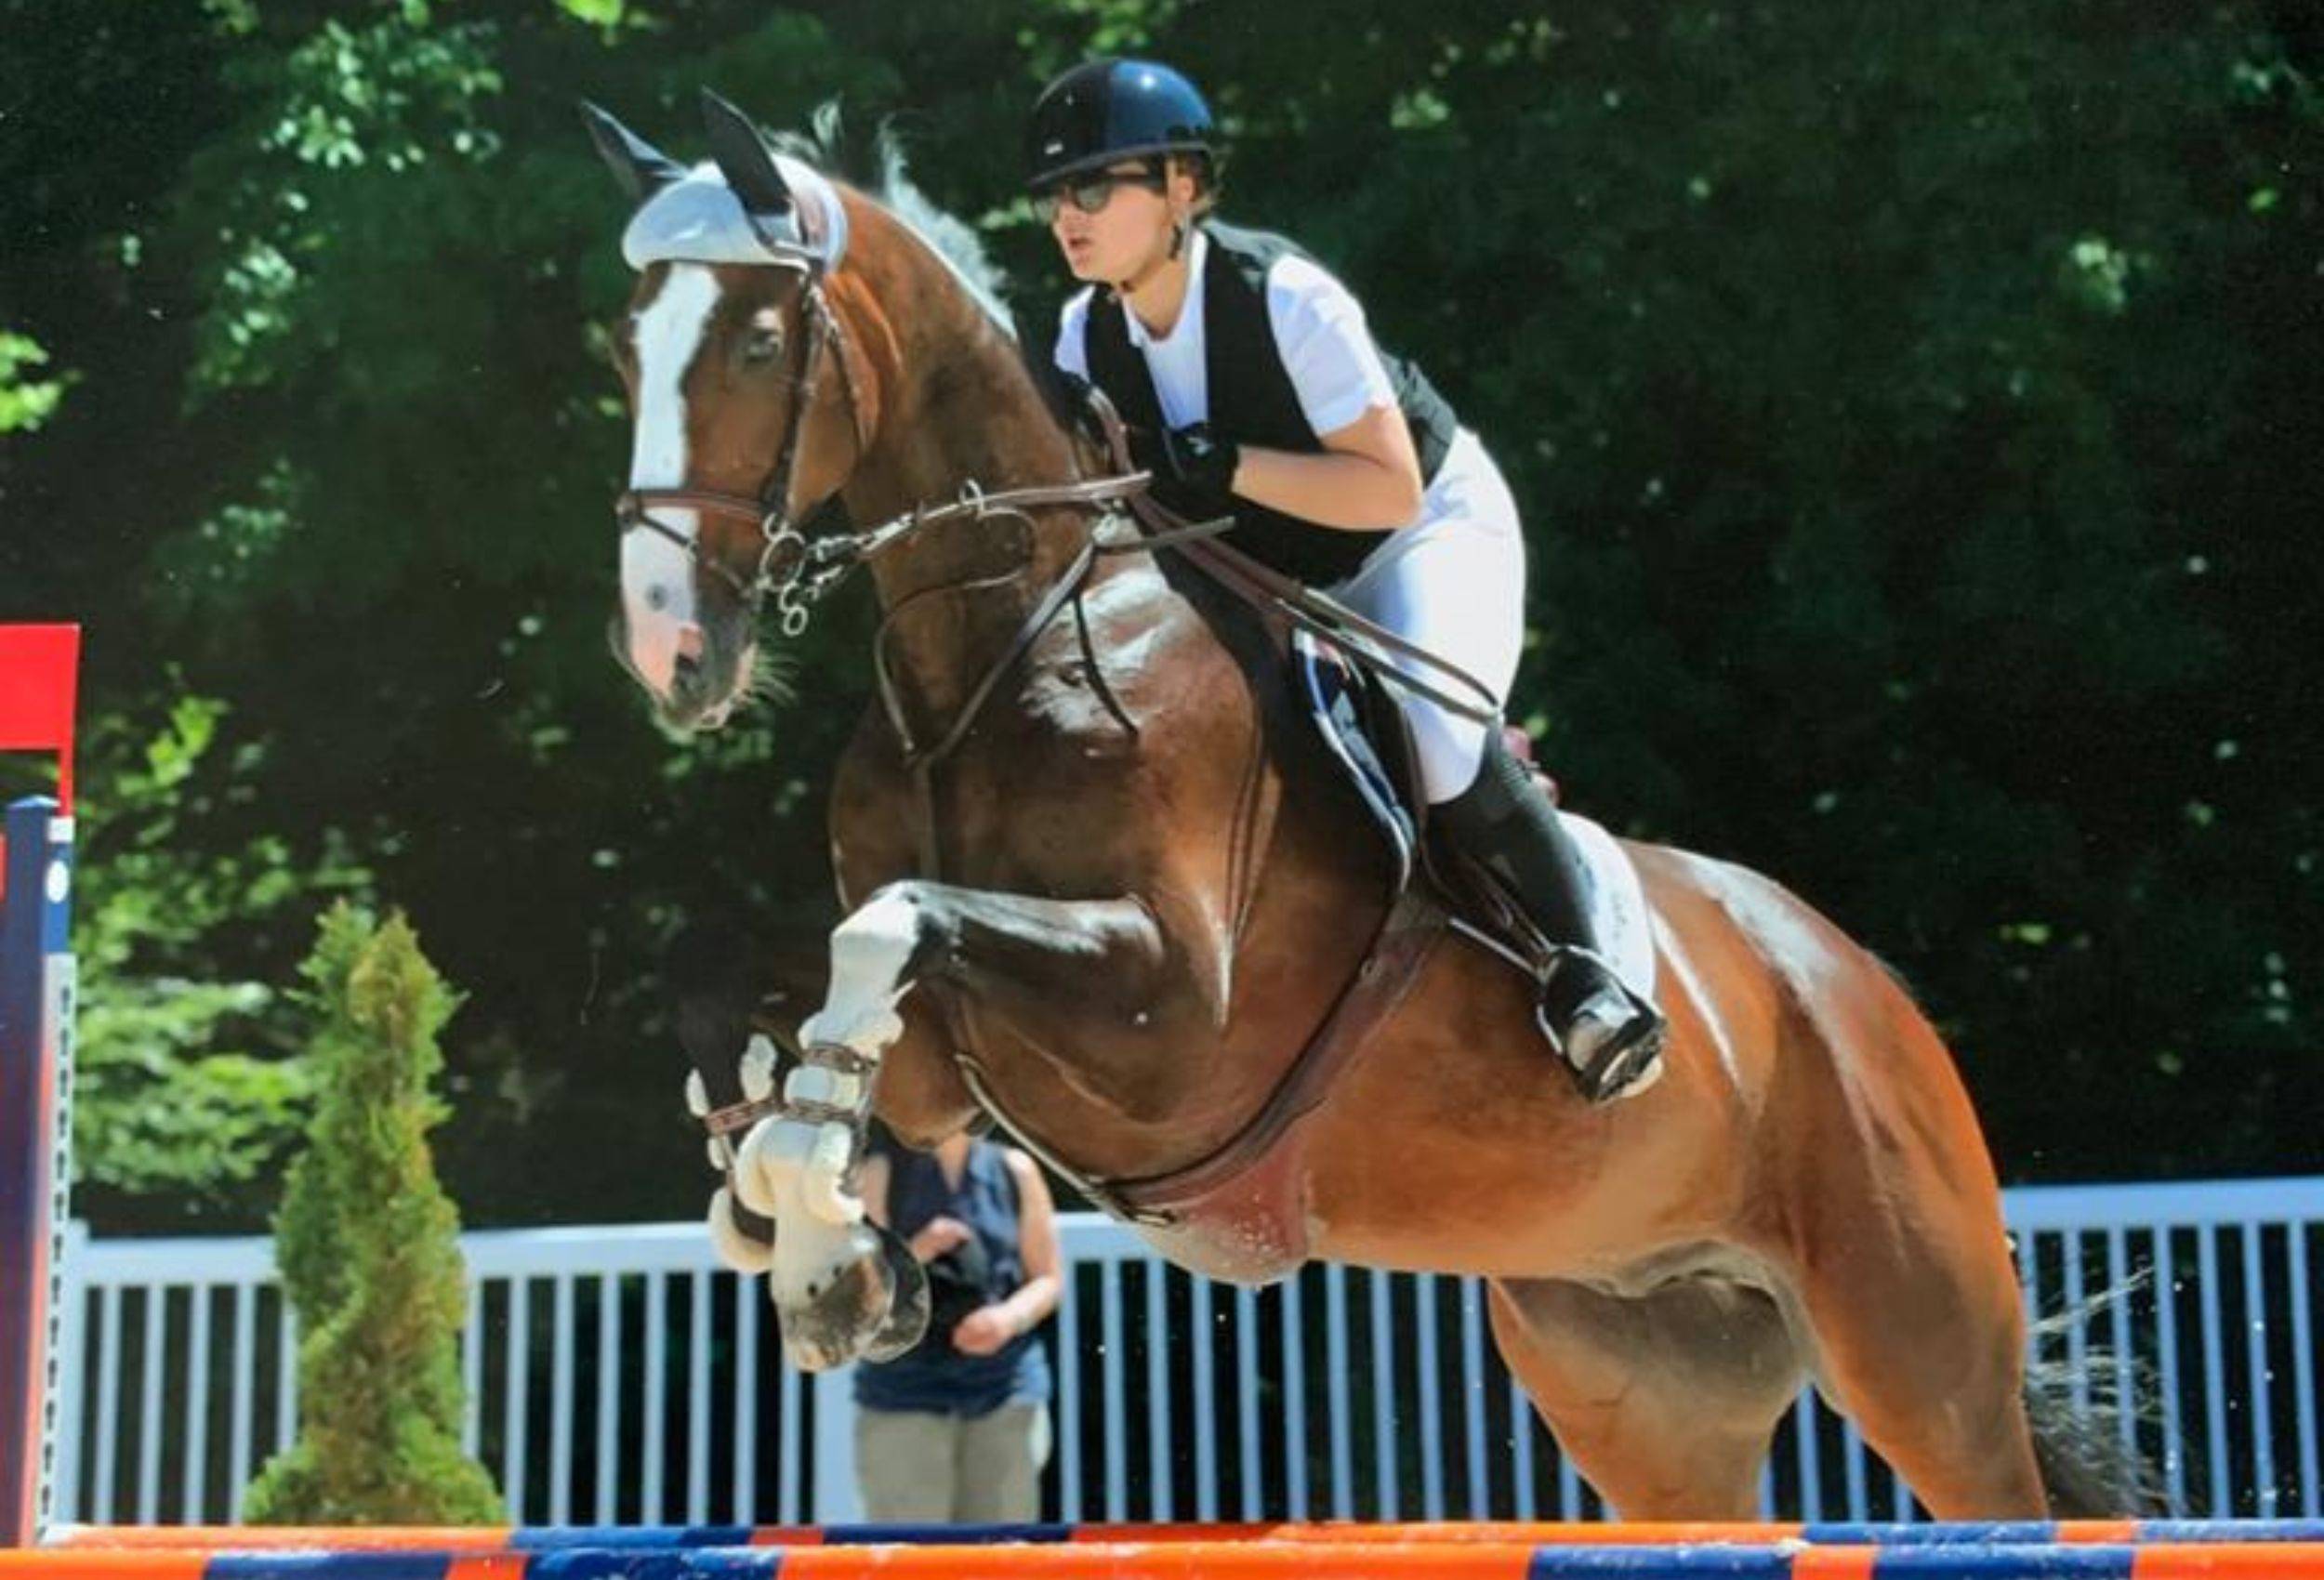 Ninon Forget, show jumping & disability